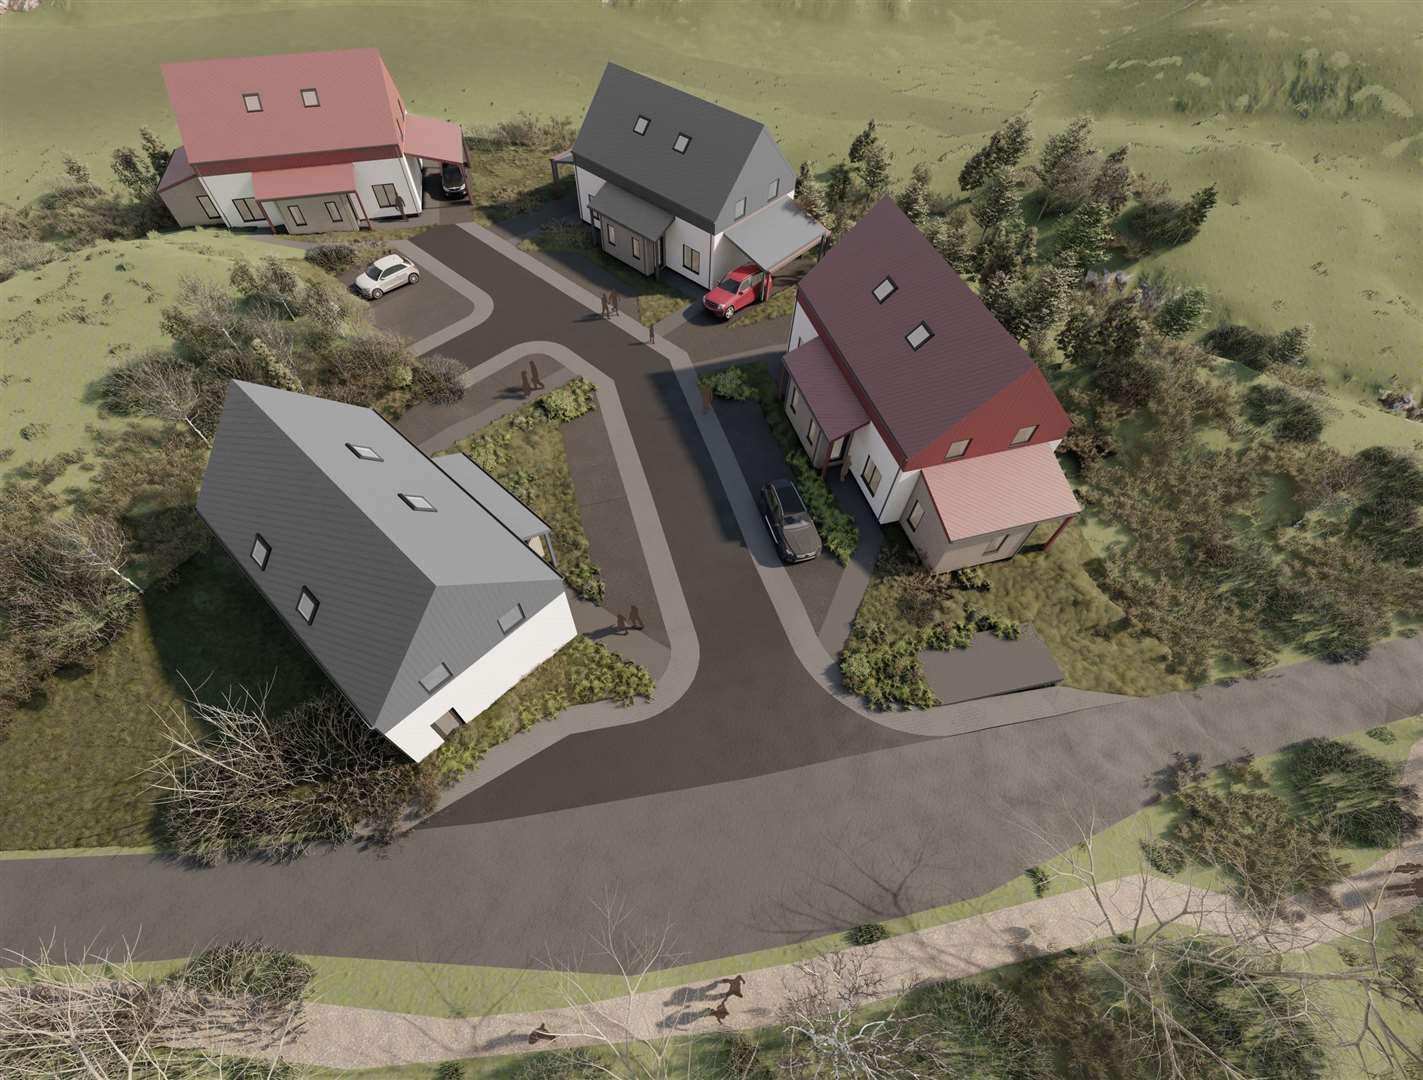 Artist's impression of an aerial view looking over Site A. Photo: Oberlanders Architects